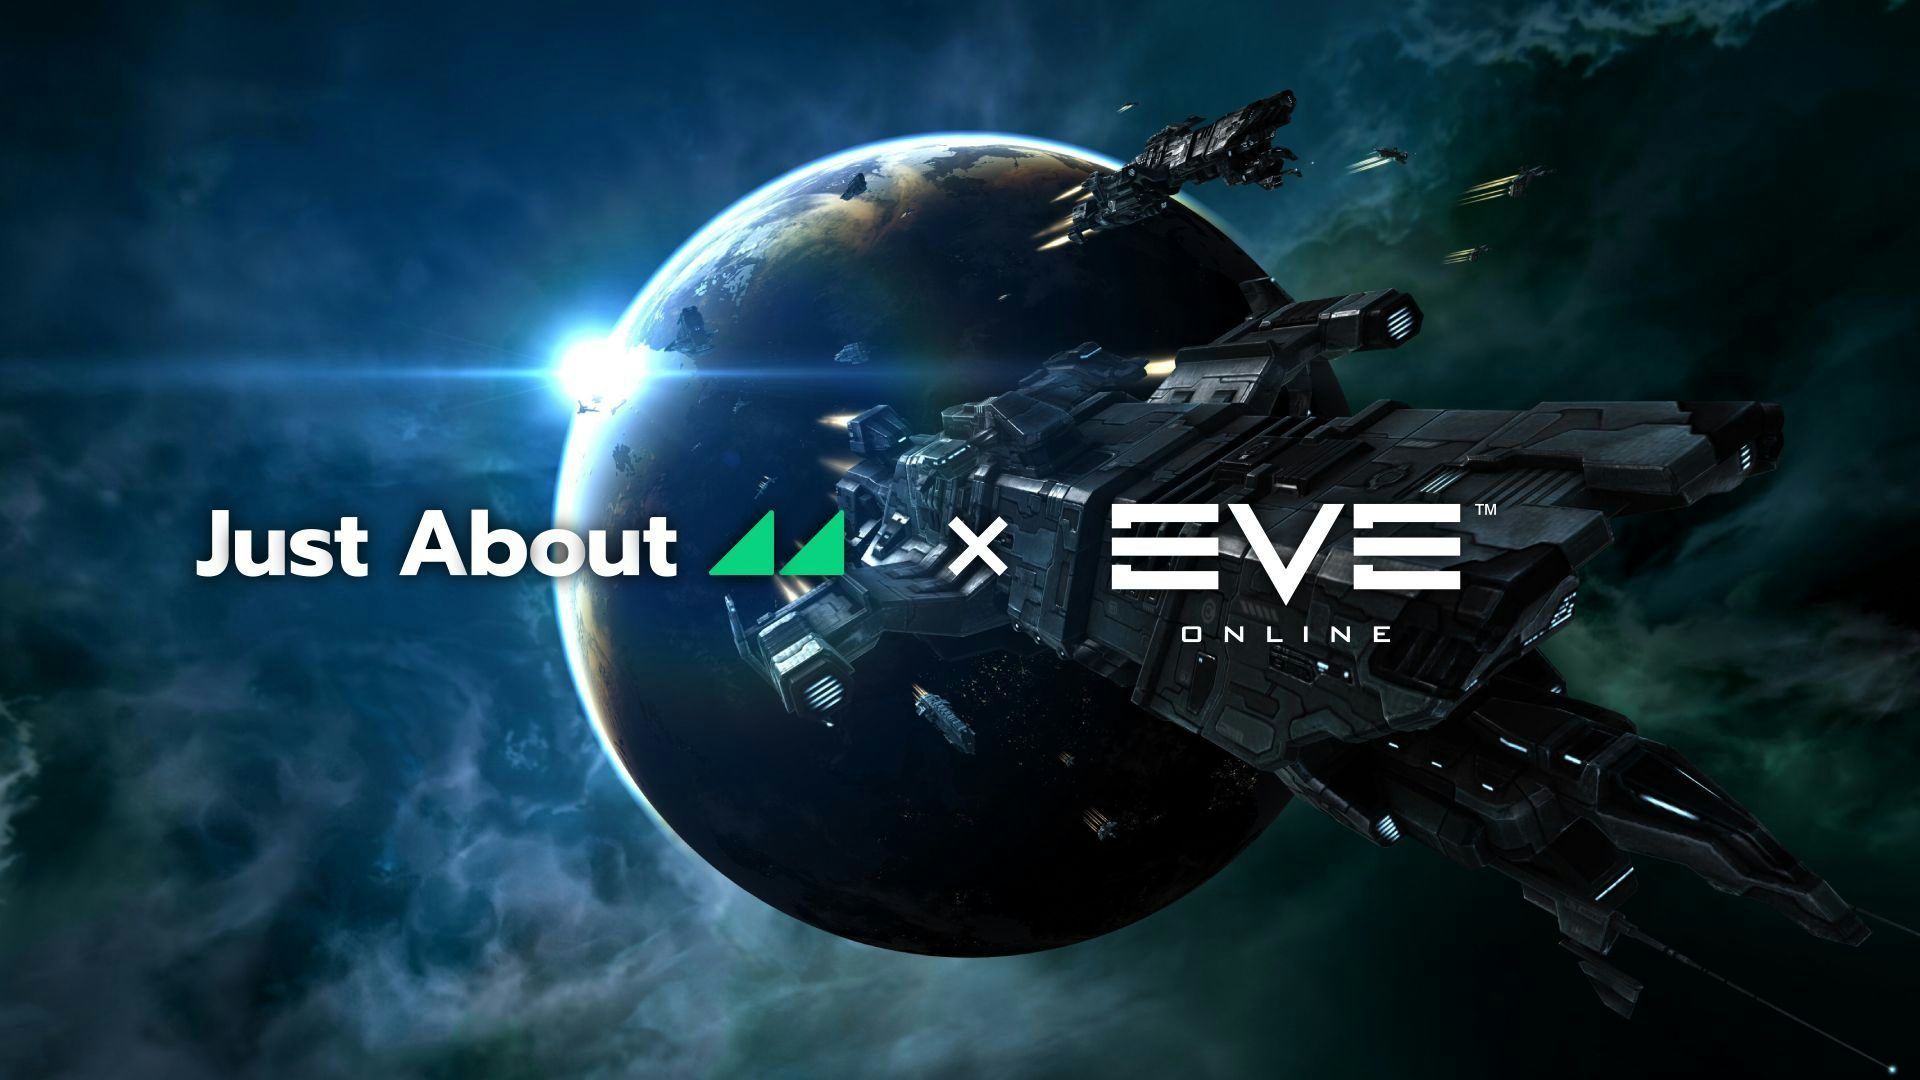 Presenting Just About EVE Online